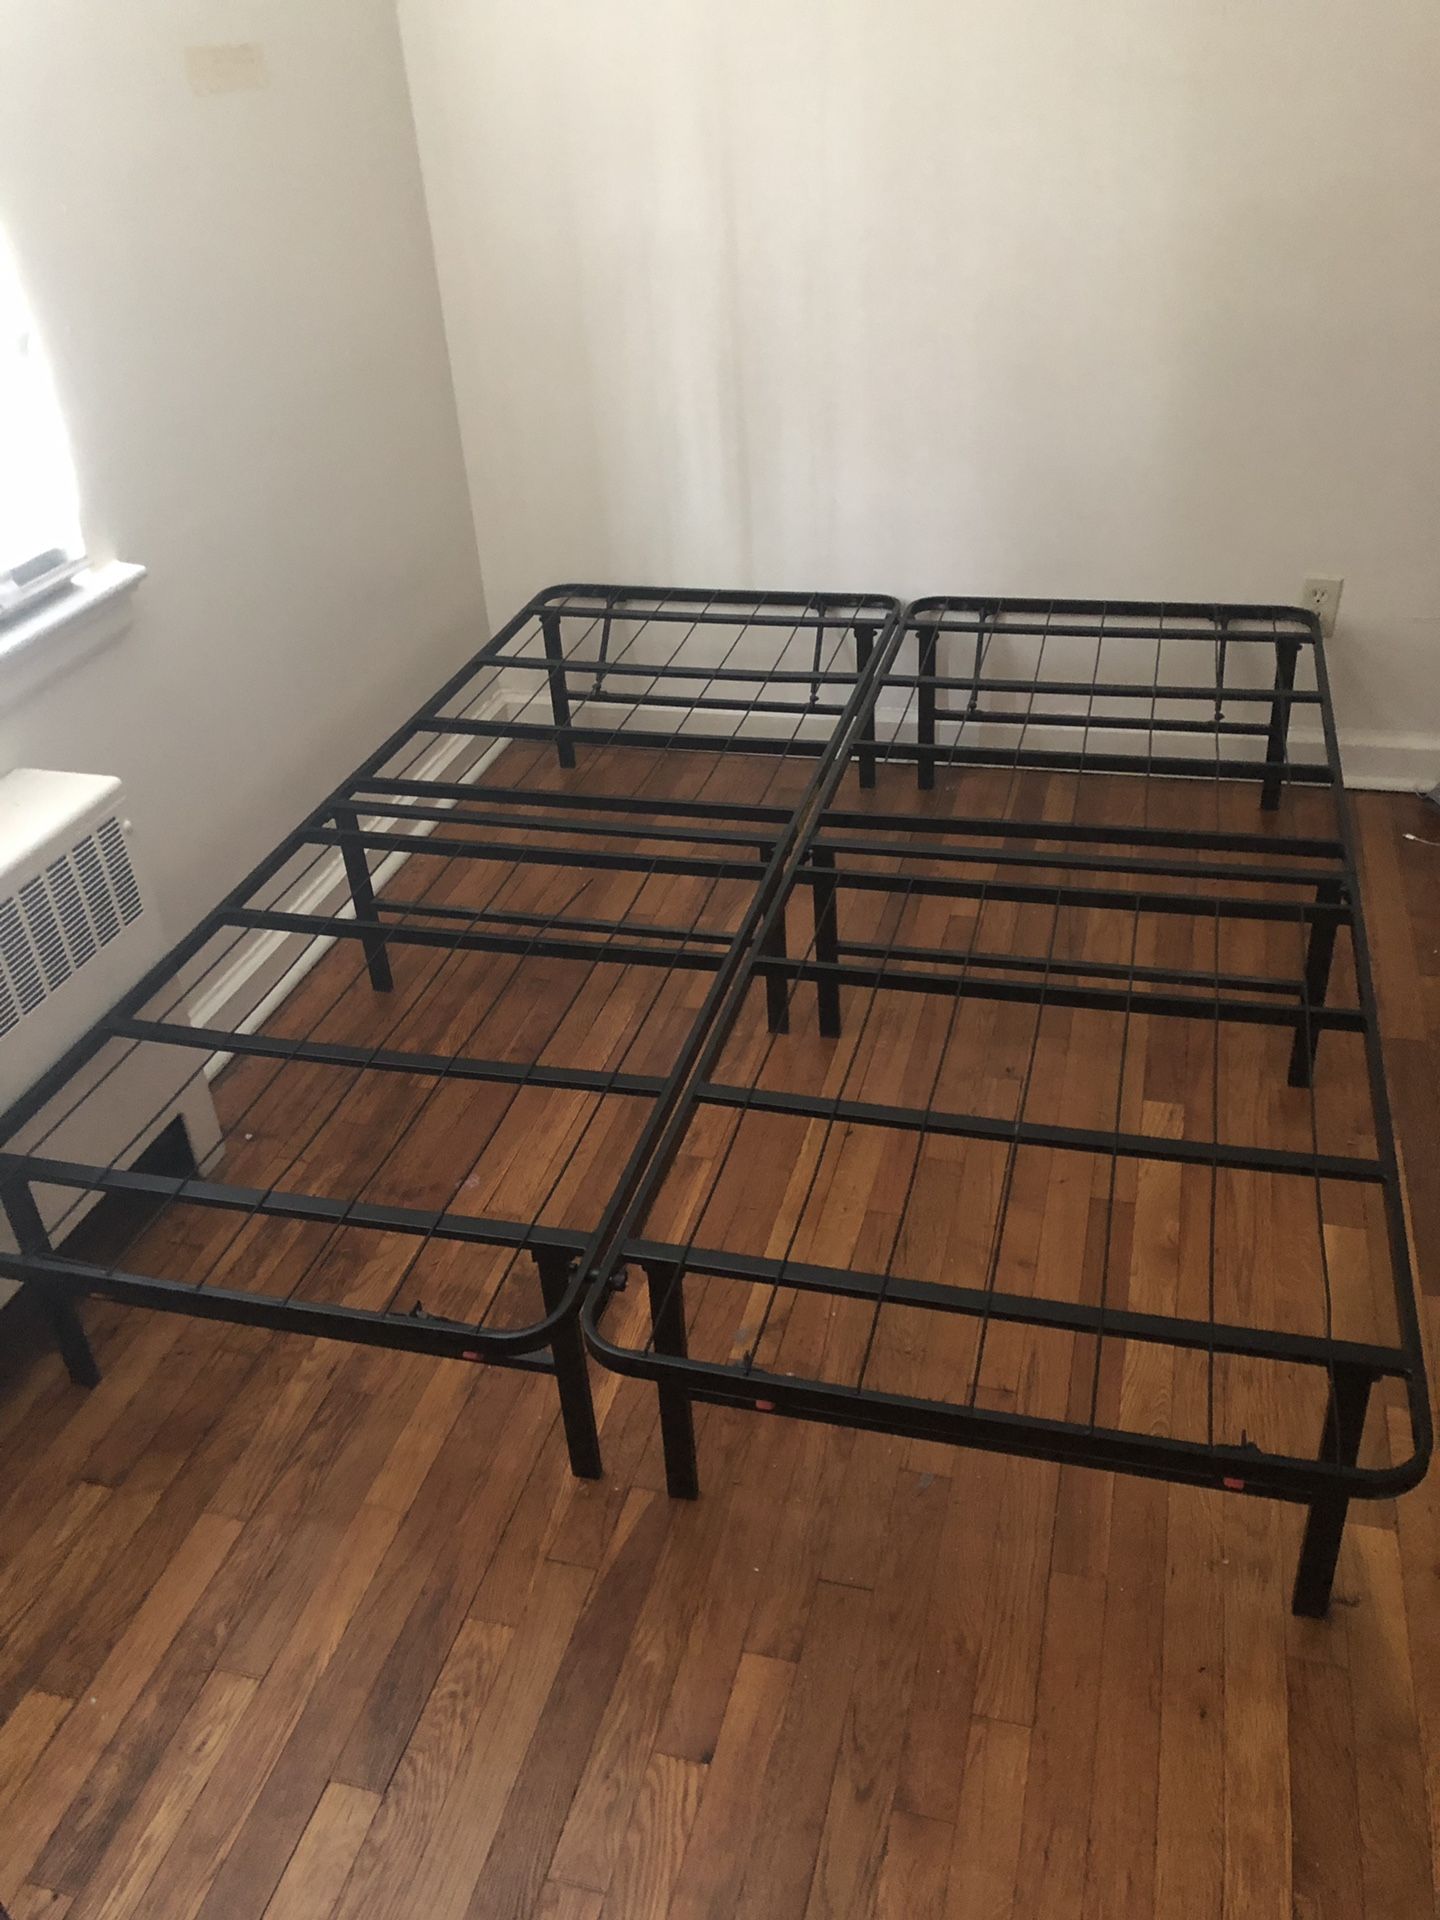 Bed Frame Queen Size $50 OBO - Needs to go by friday